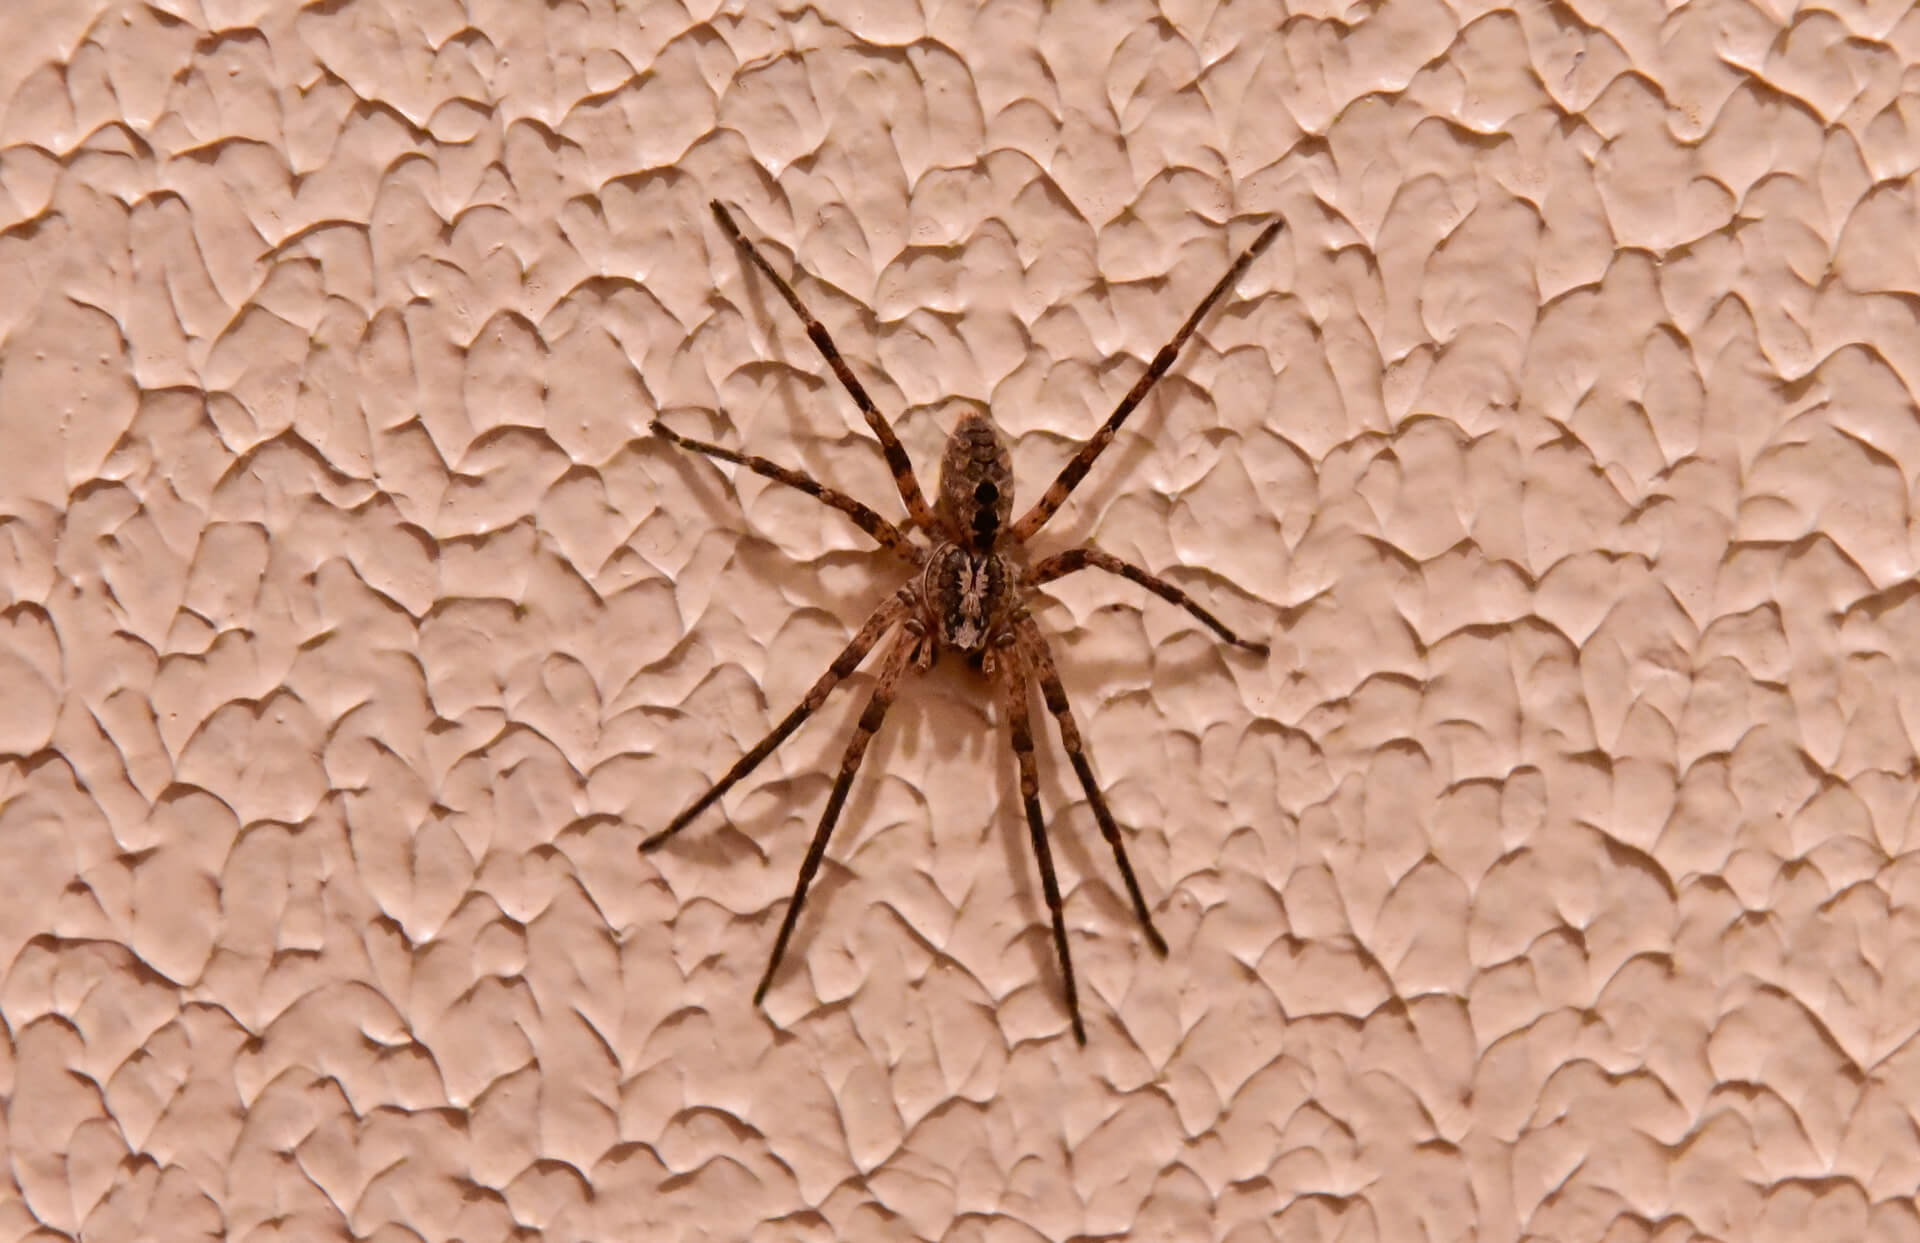 Wolf Spider On Wall In Person's House